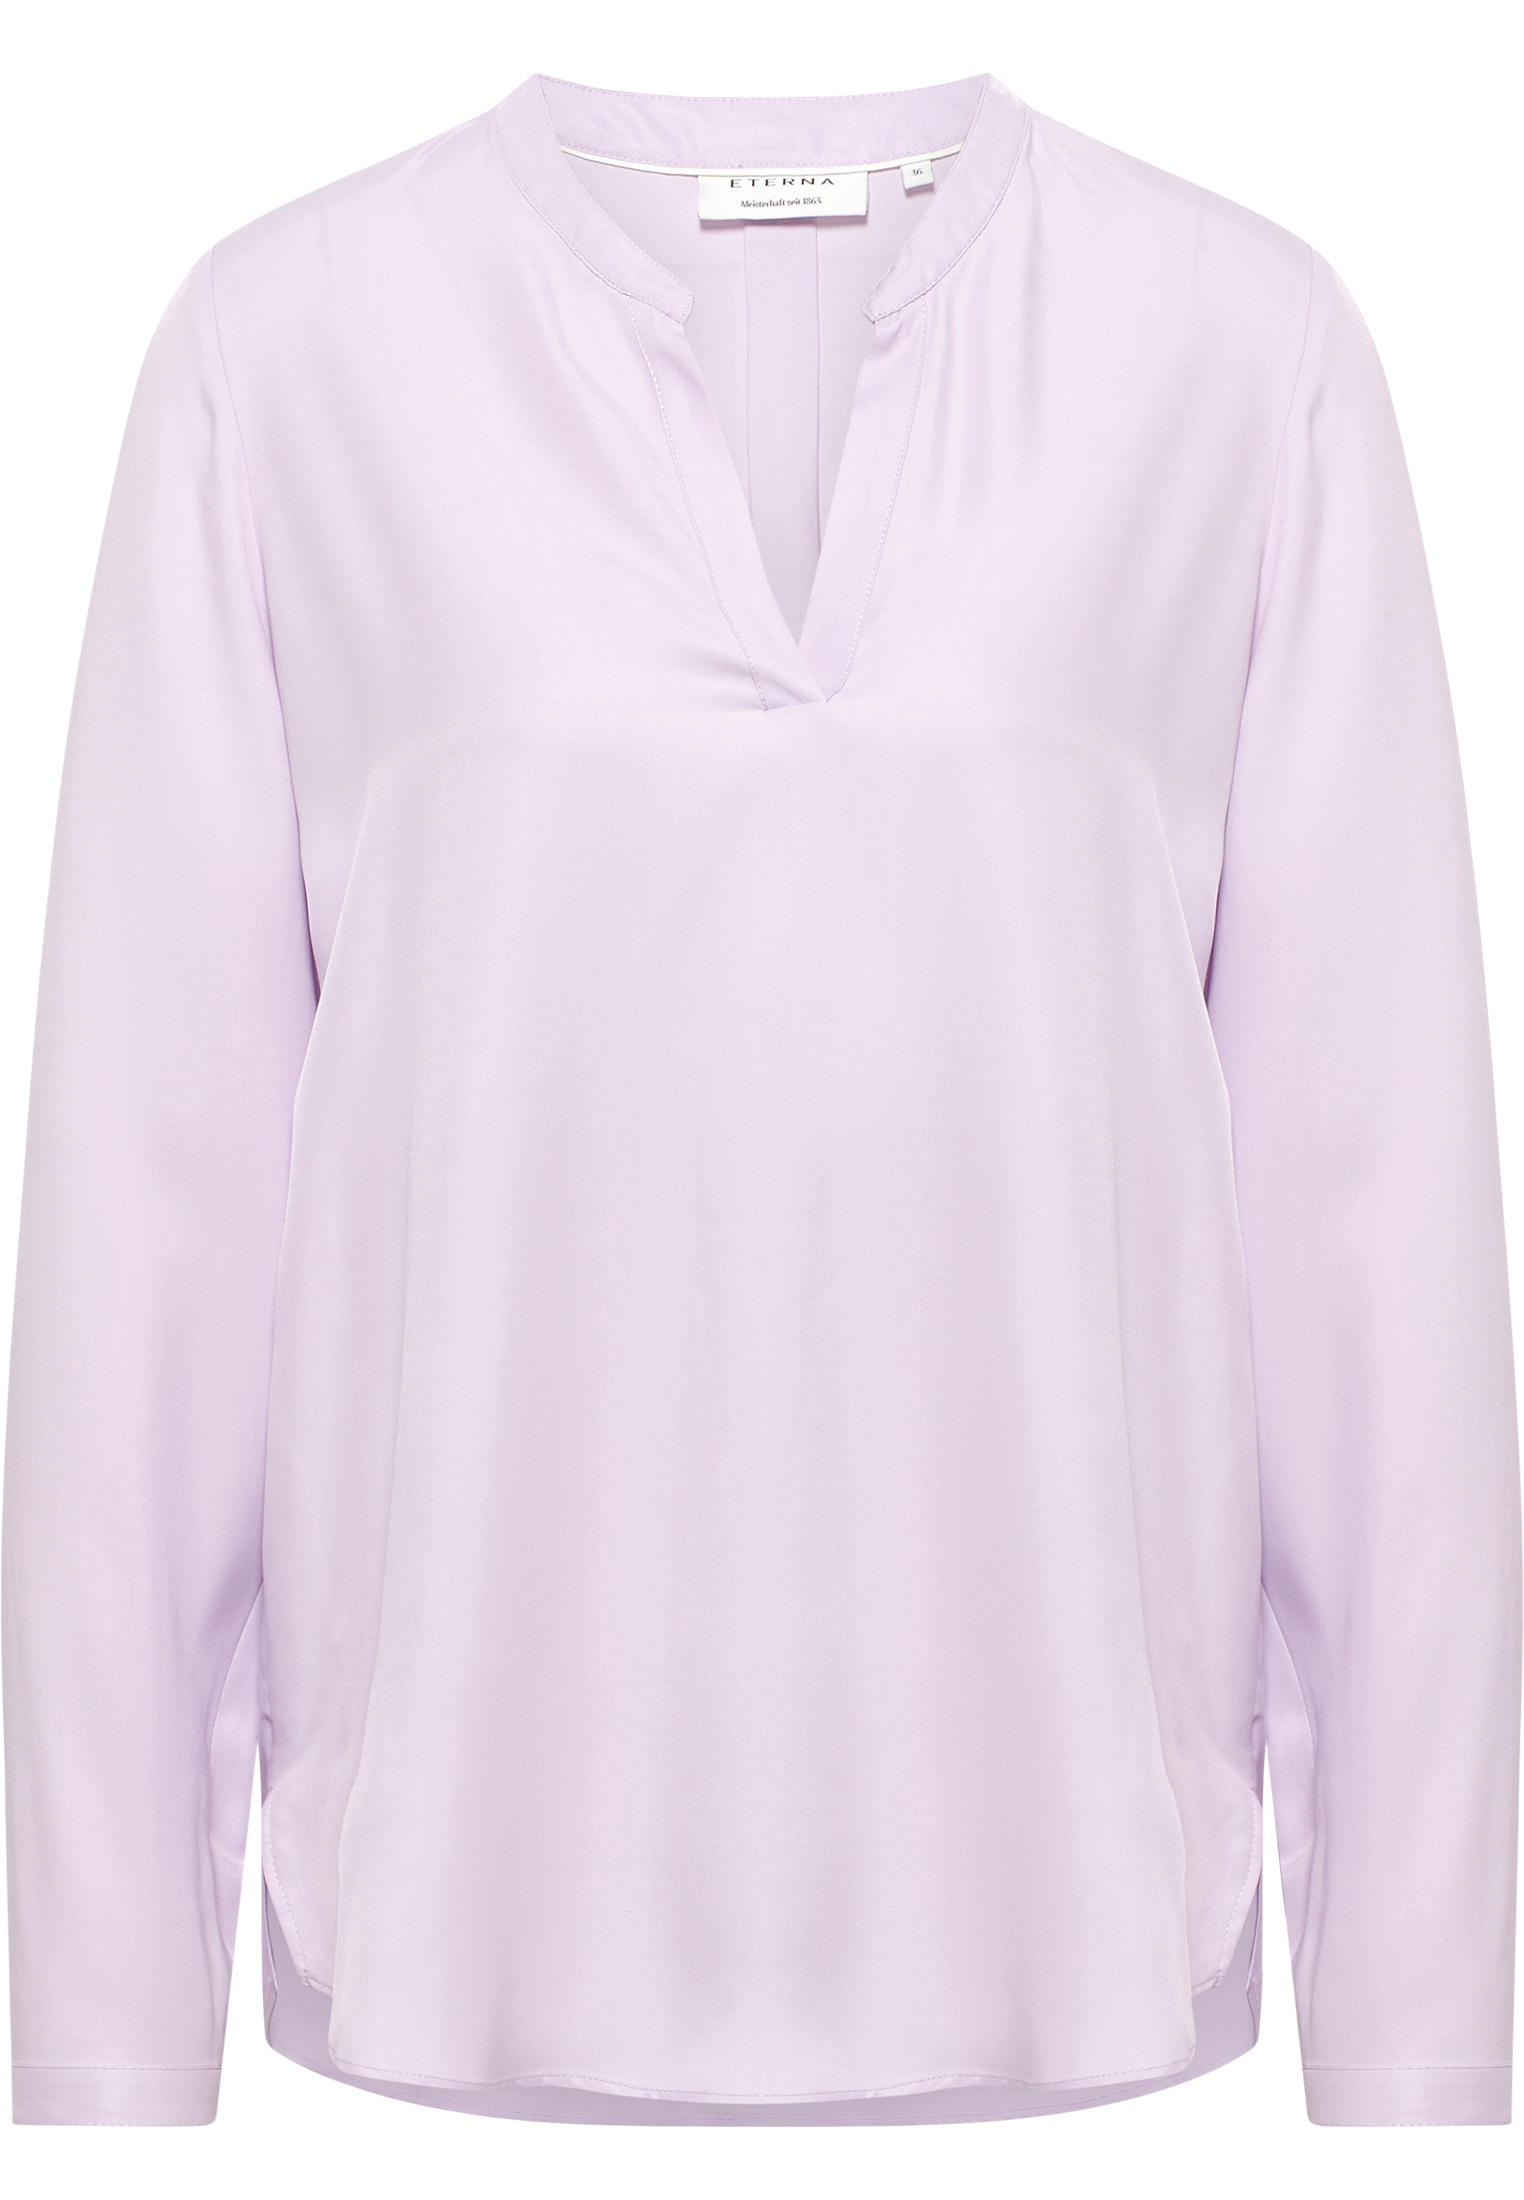 Shirt in | | 2BL04297-09-21-48-1/1 Bluse orchid orchid unifarben | Langarm | Viscose 48